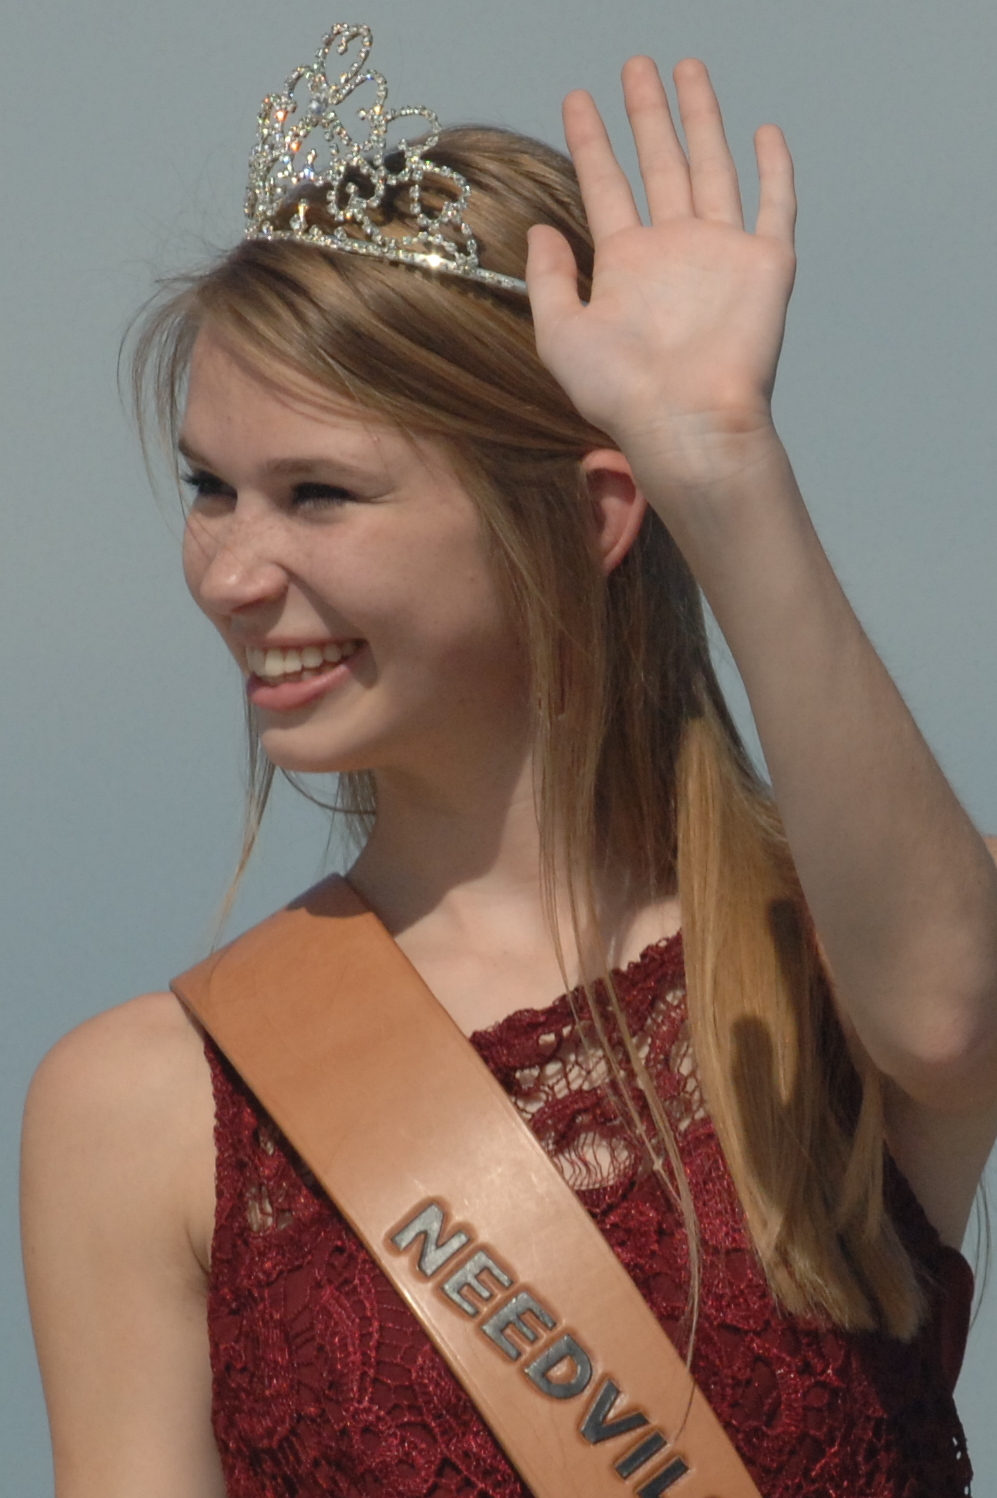 a young lady wearing a crown waves to the crowd